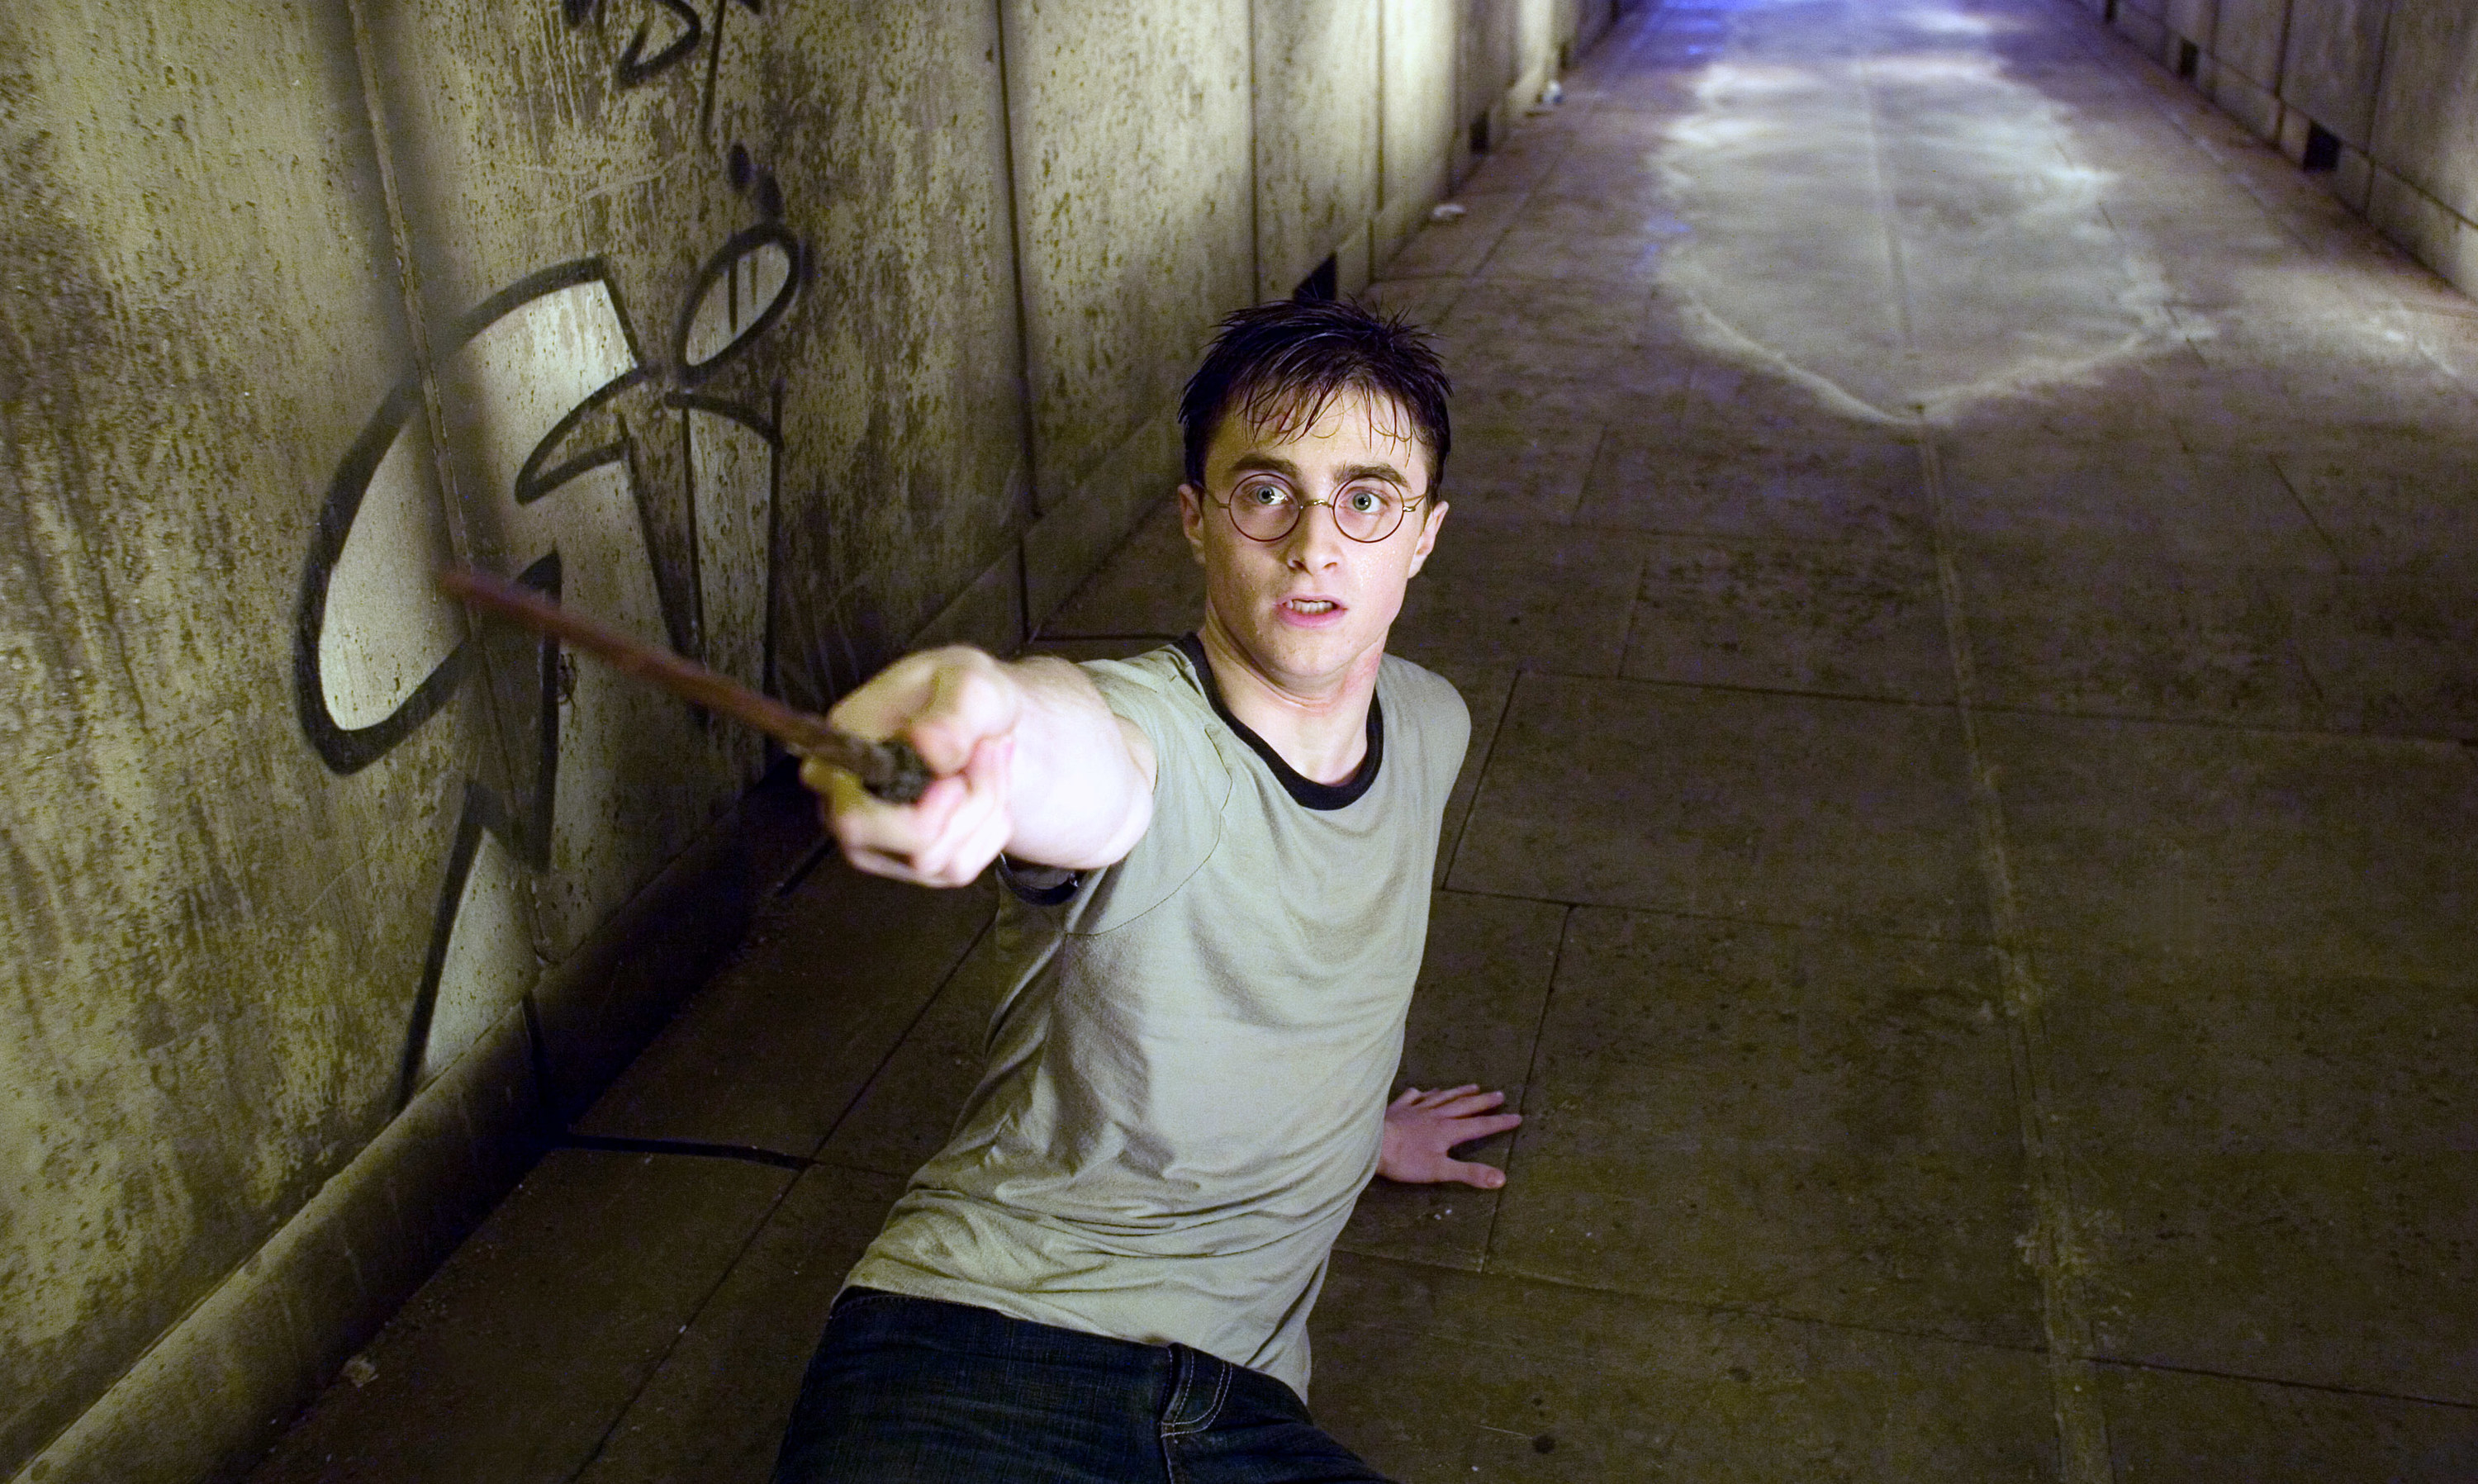 Radcliffe as Harry Potter